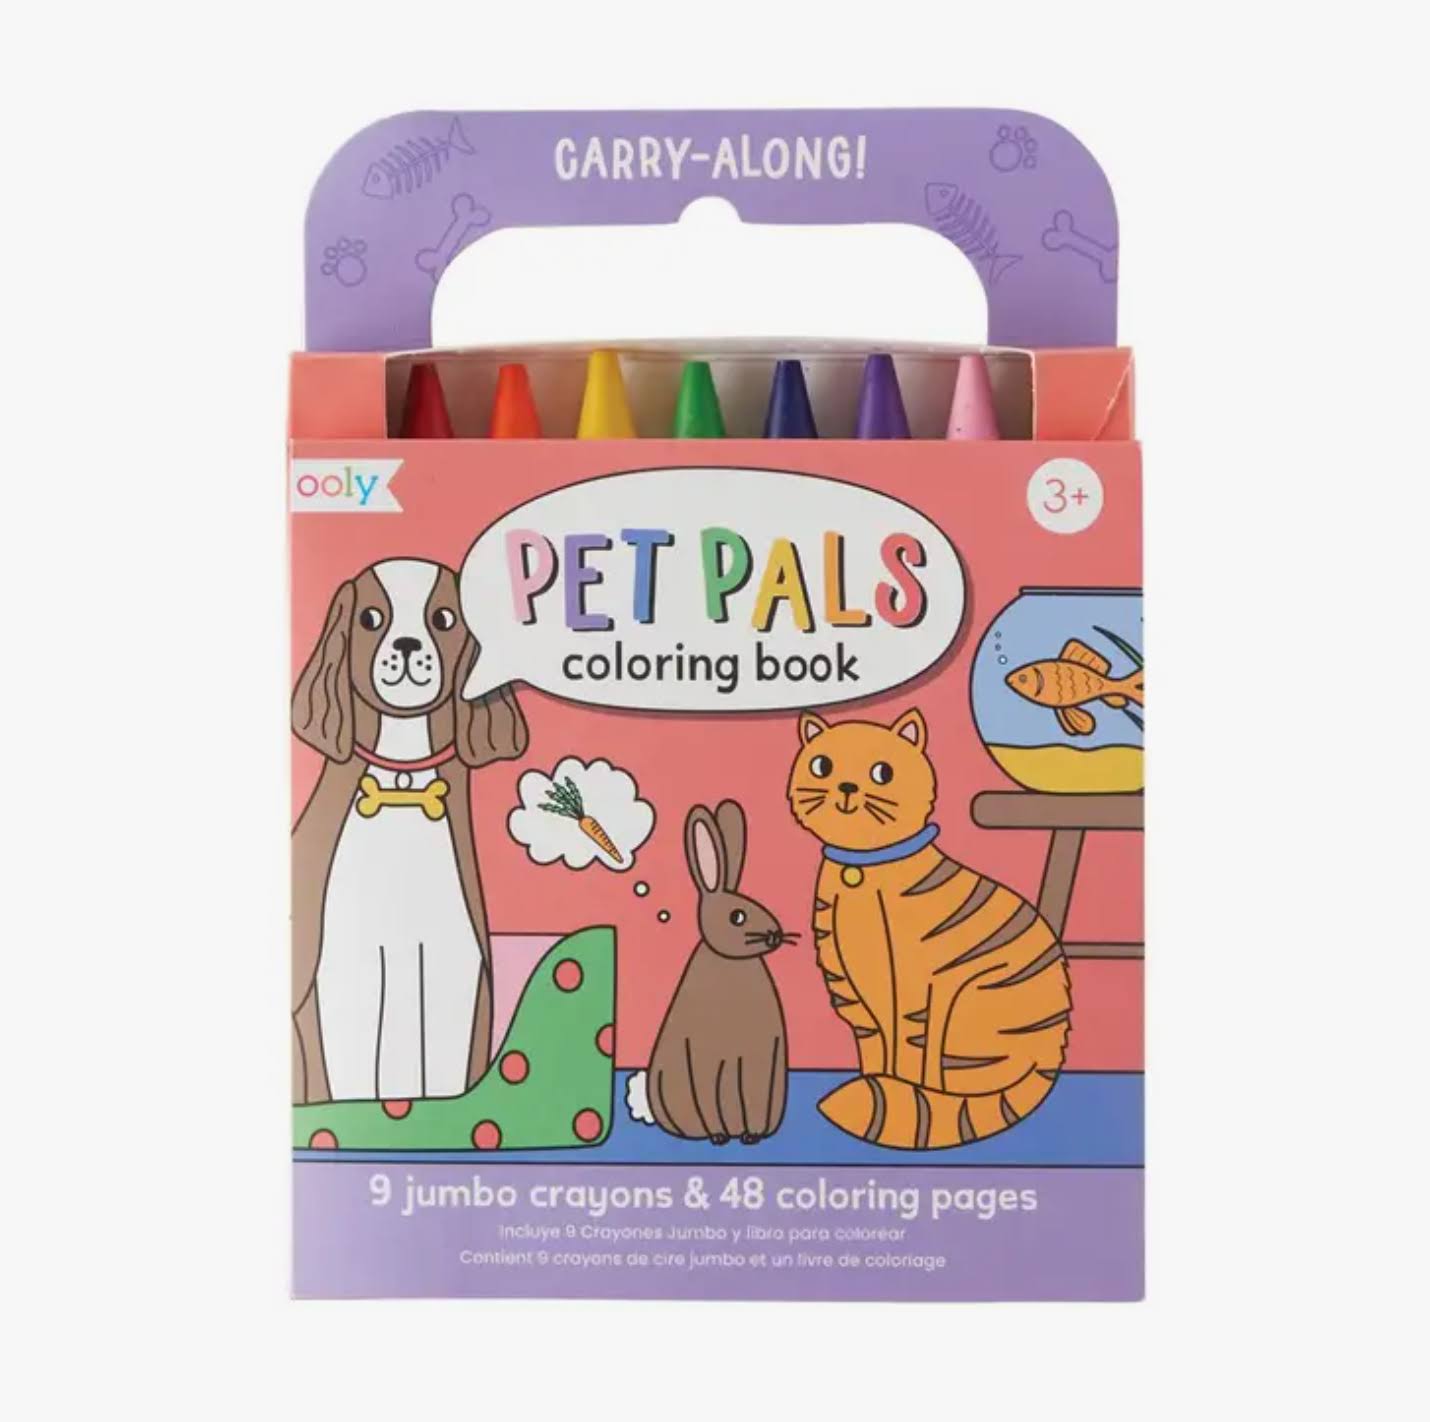 Ooly Carry Along Colouring Book Set - Pet Pals